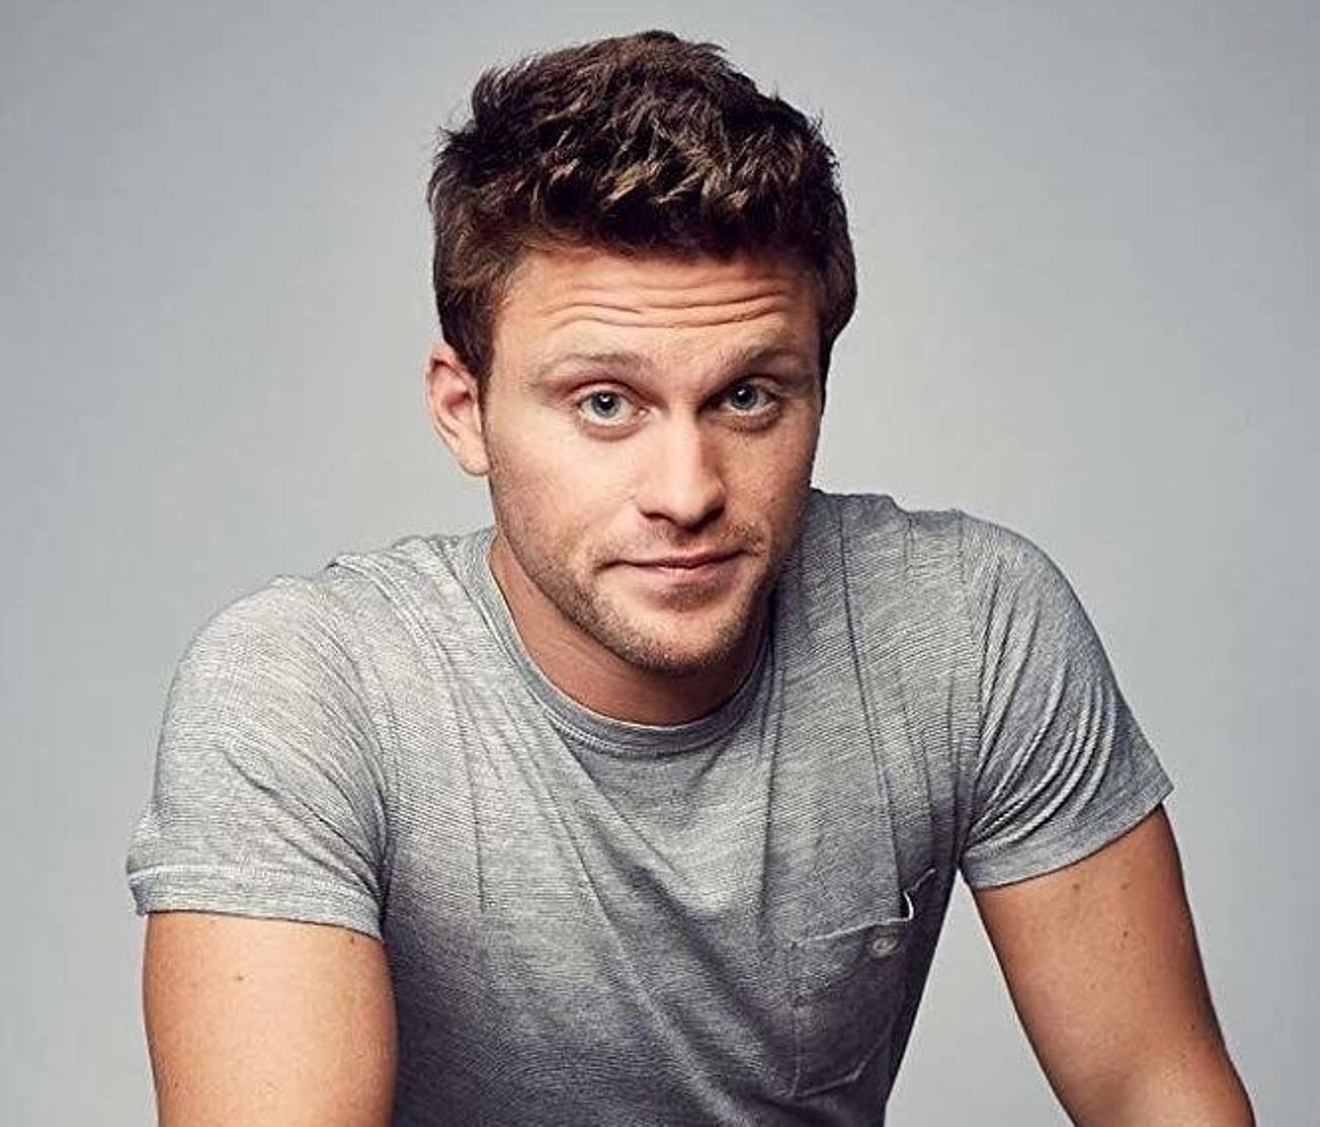 Live from Dallas it's Friday and Saturday night. Former SNL cast member and comedian Jon Rudnitsky is performing two nights this weekend at the Dallas Comedy Club.